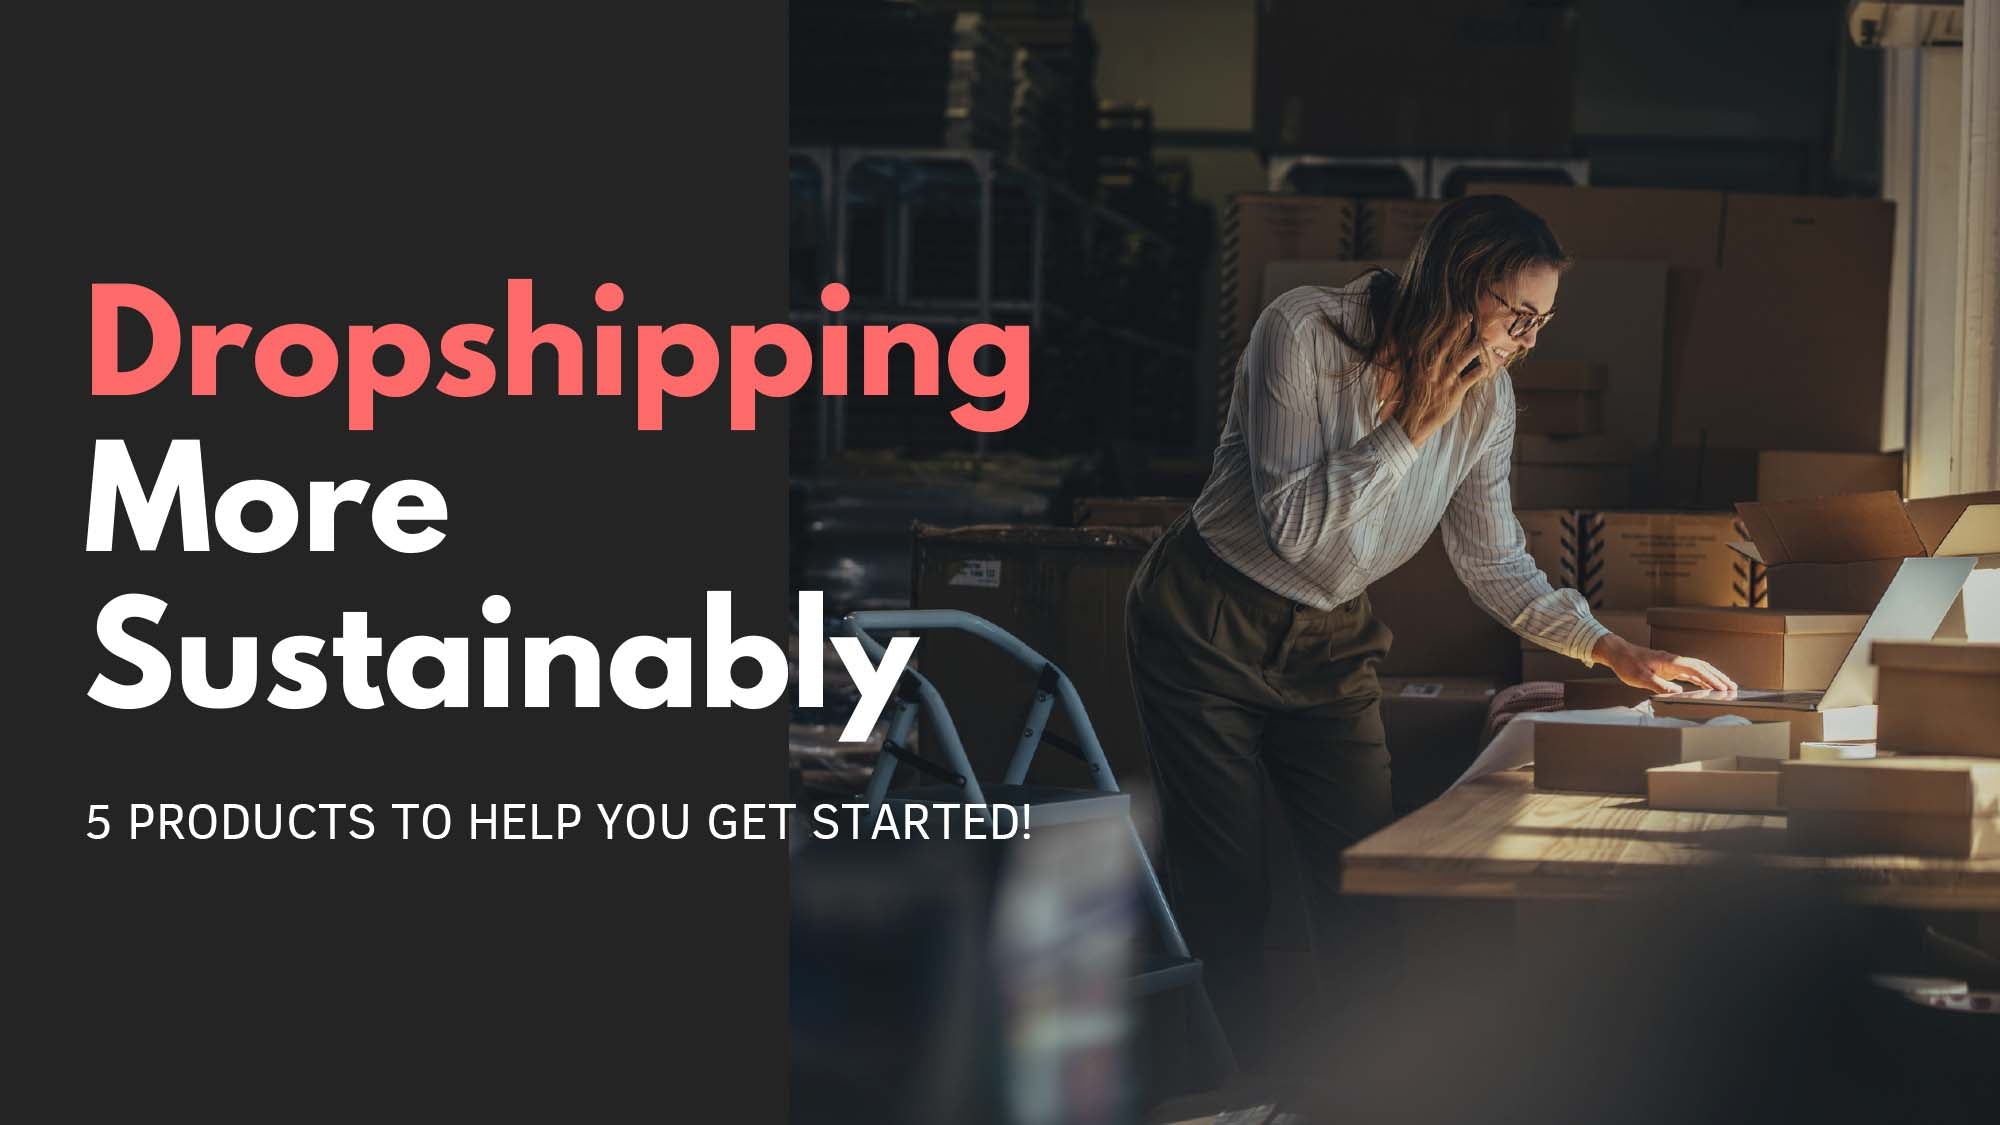 Green Dropshipping 101: Guide To Eco-Friendly Products Dropshipping